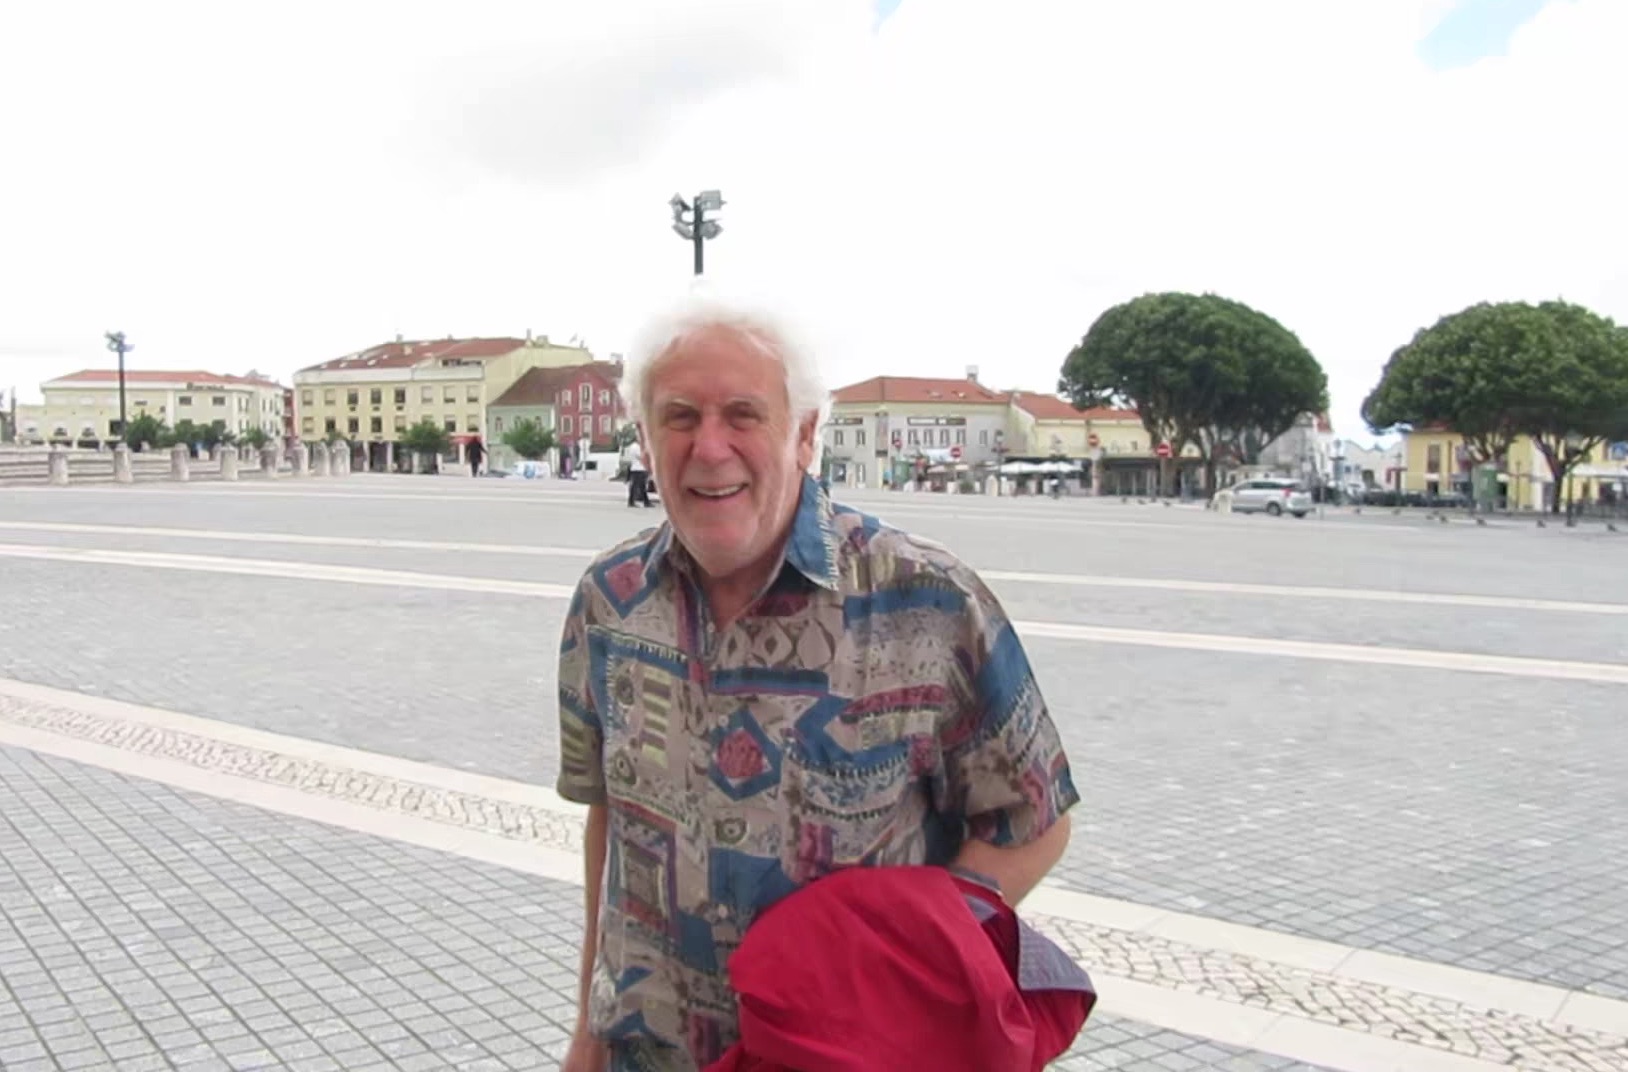 Dr Riccardo Salvatore in front of the city of Mafra